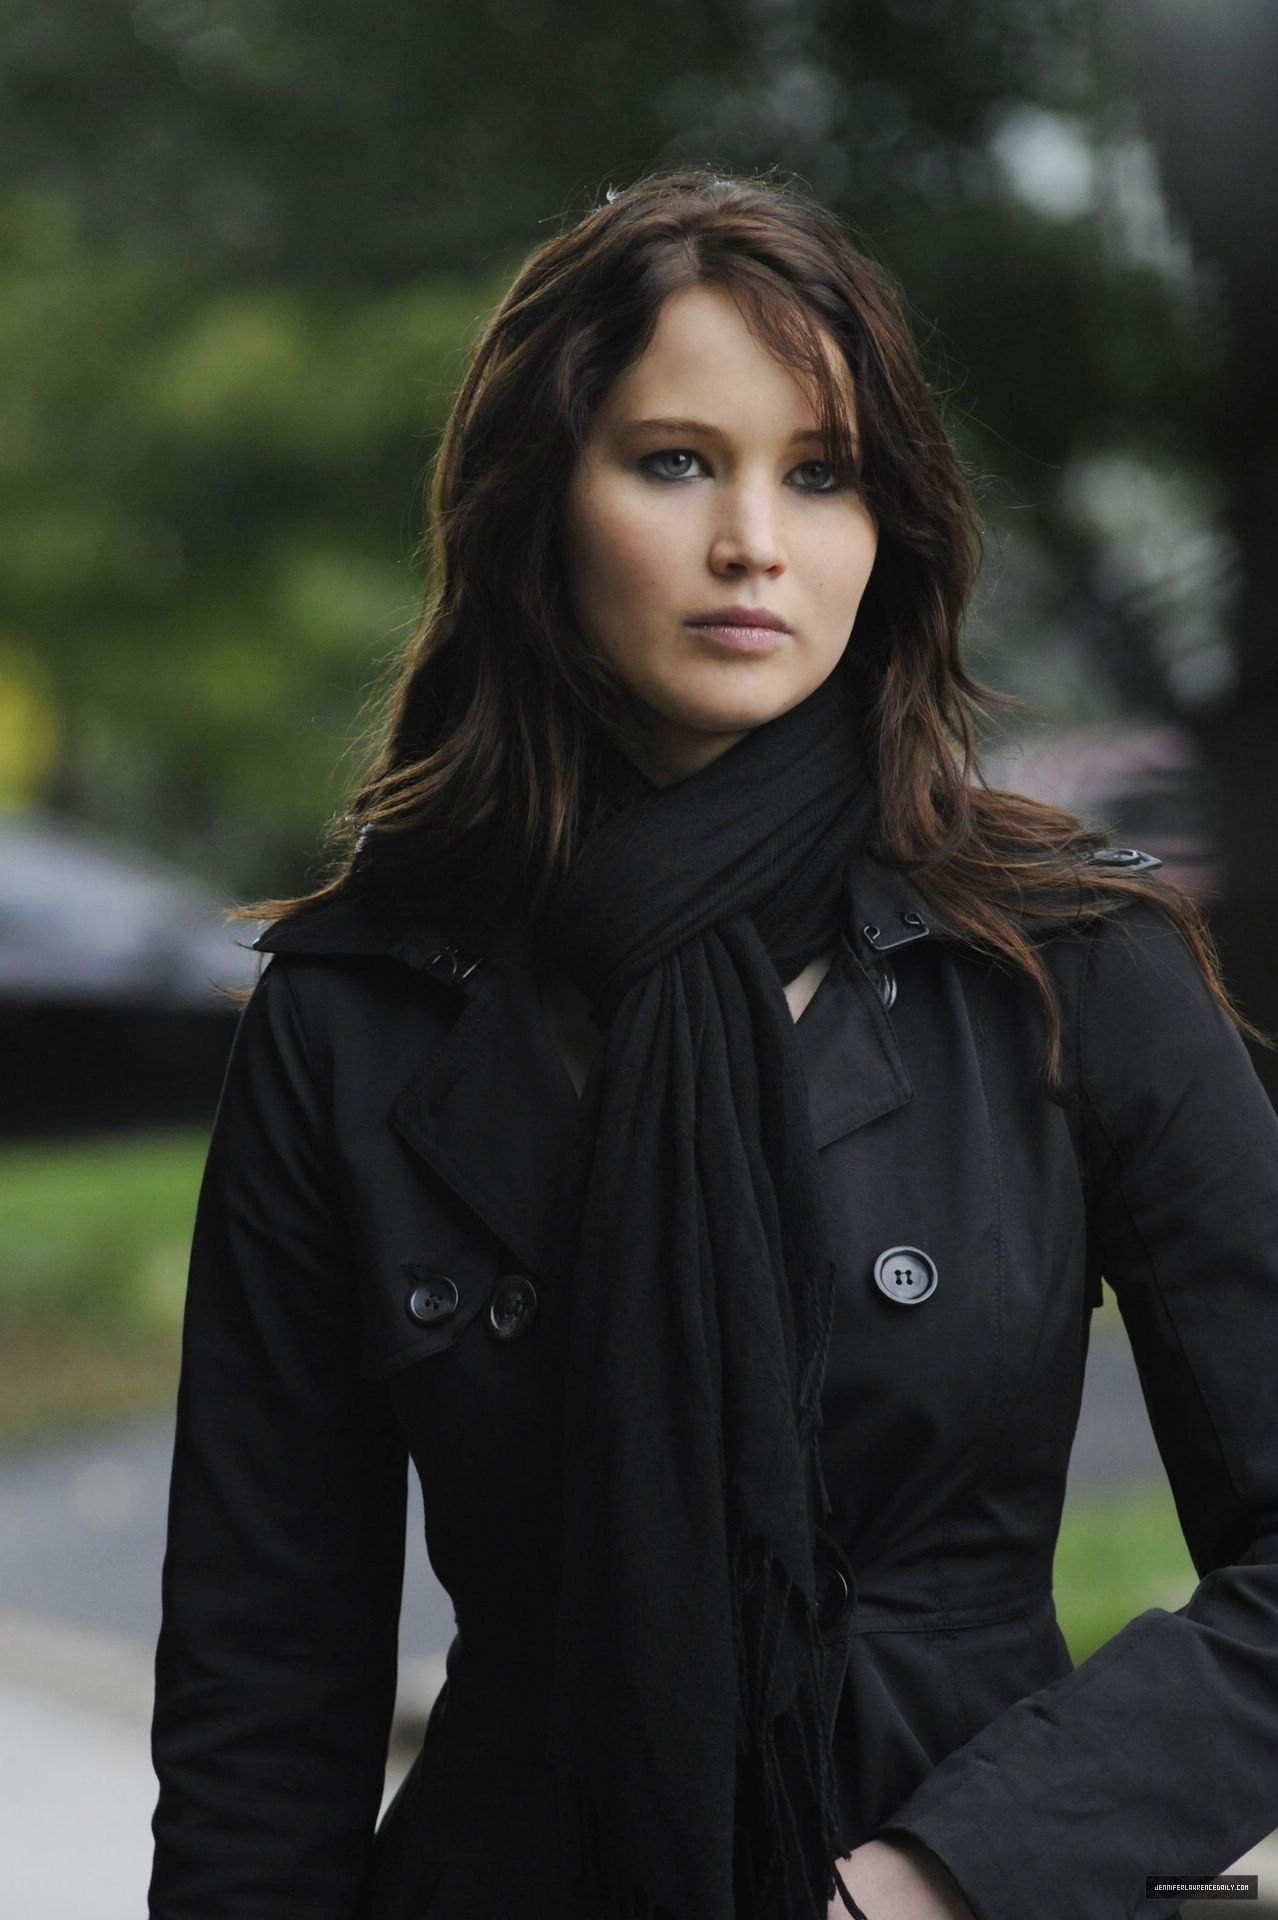 Silver Linings Playbook, Jennifer Lawrence's powerful performance, New stills of Tiffany, Compelling character portrayal, 1280x1920 HD Handy